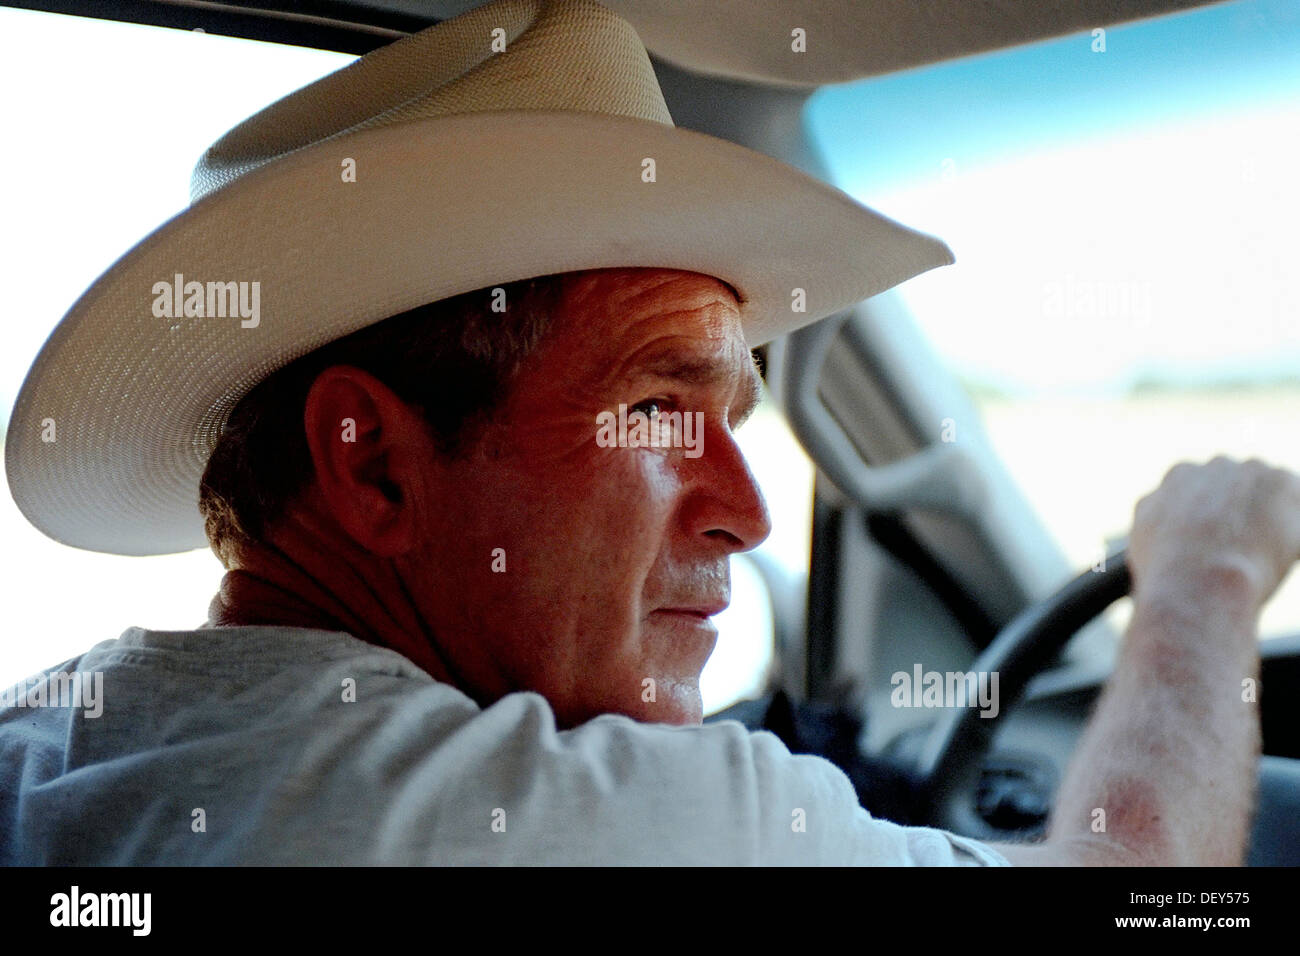 US President George W. Bush drives his pickup truck wearing a cowboy hat at his ranch August 9, 2002 in Crawford, Texas. Stock Photo